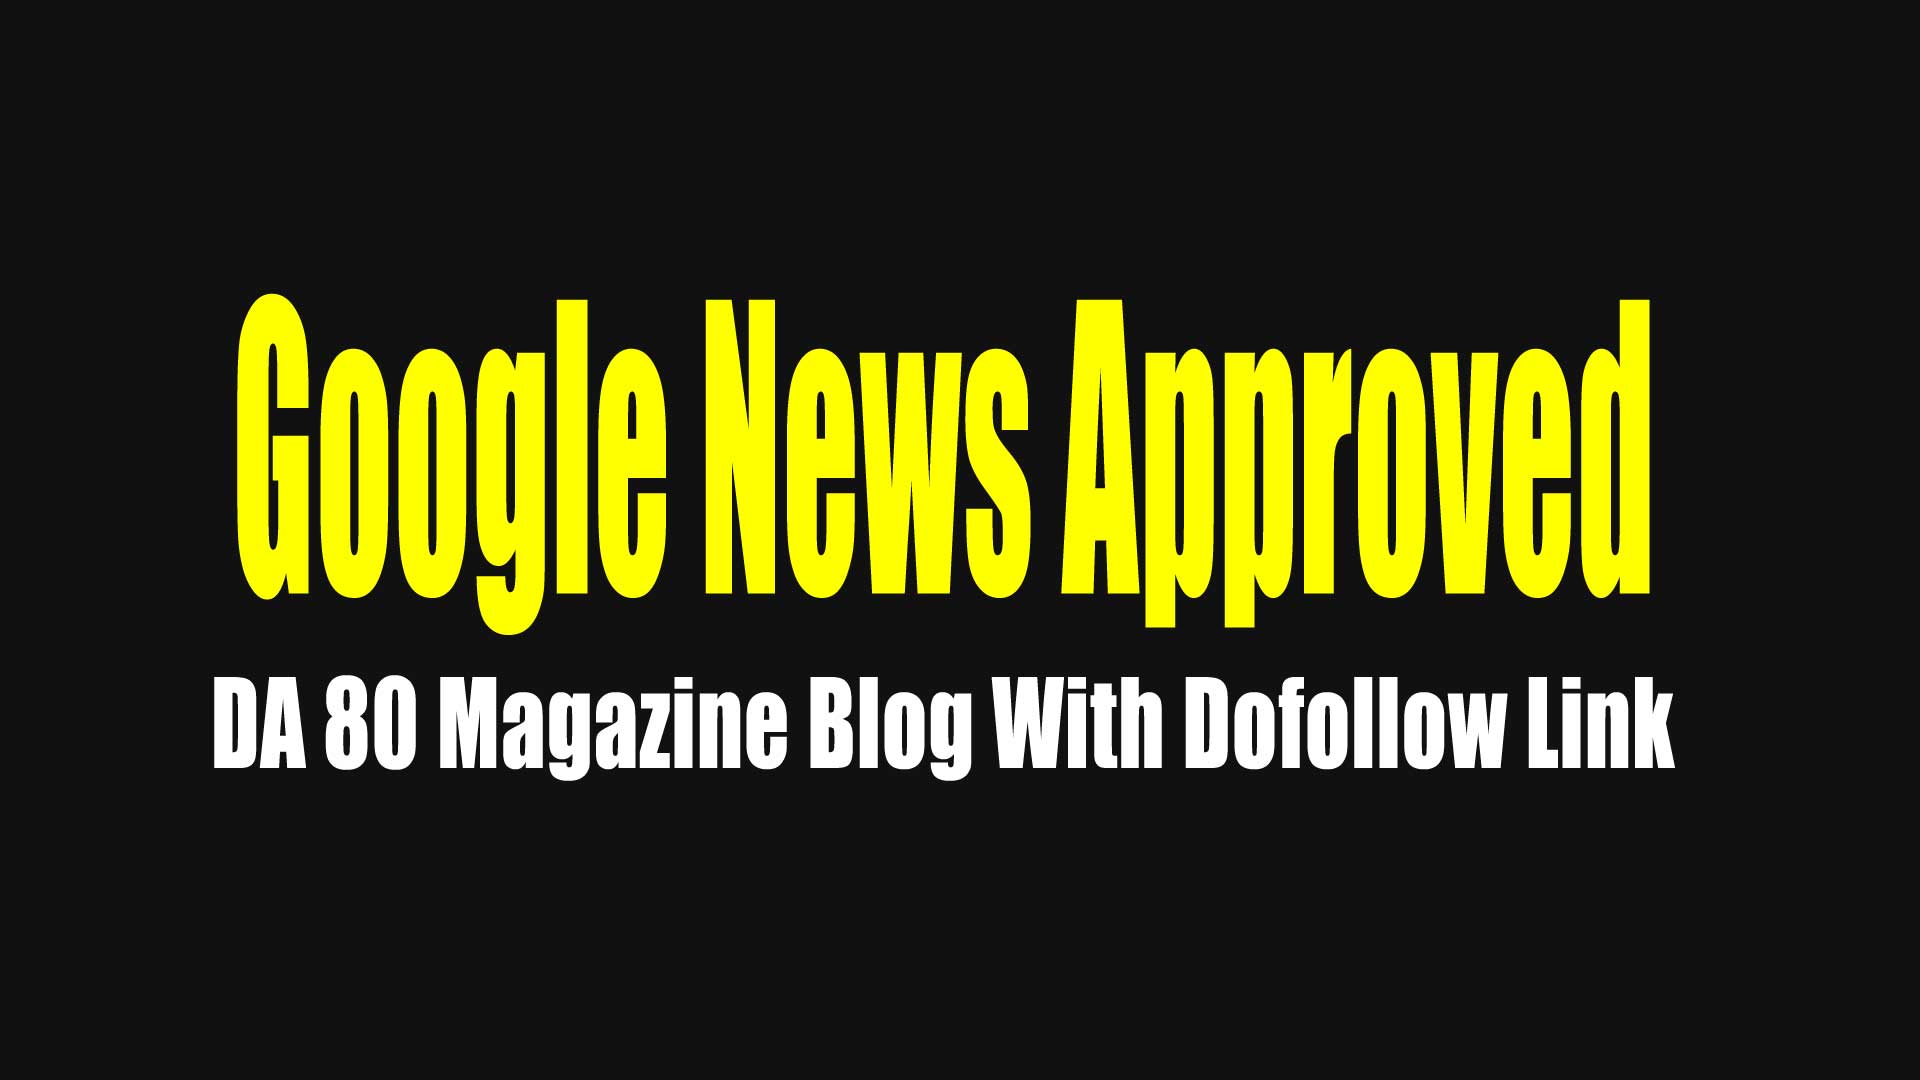 Publish a Guest post on "Google News Approved" DA 80 Magazine Blog With Dofollow Link